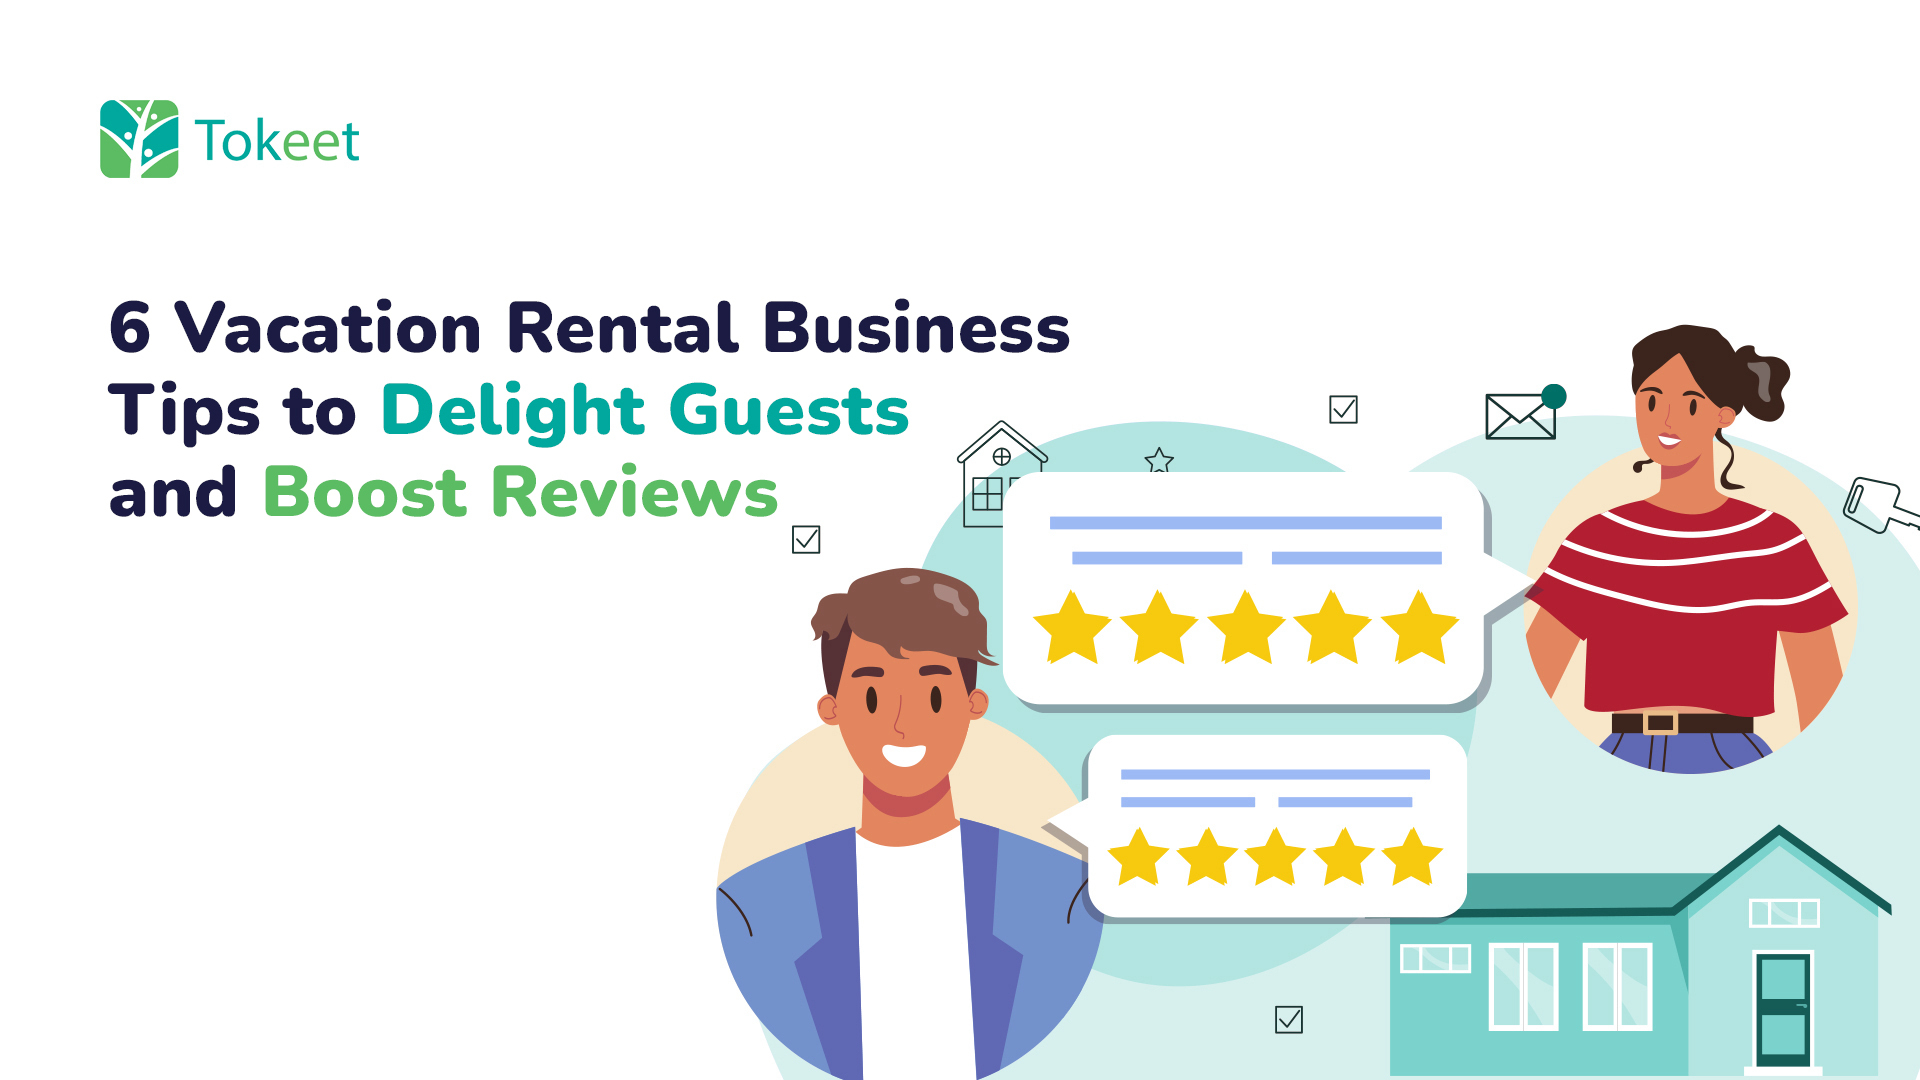 6 Vacation Rental Business Tips to Delight Guests and Boost Reviews